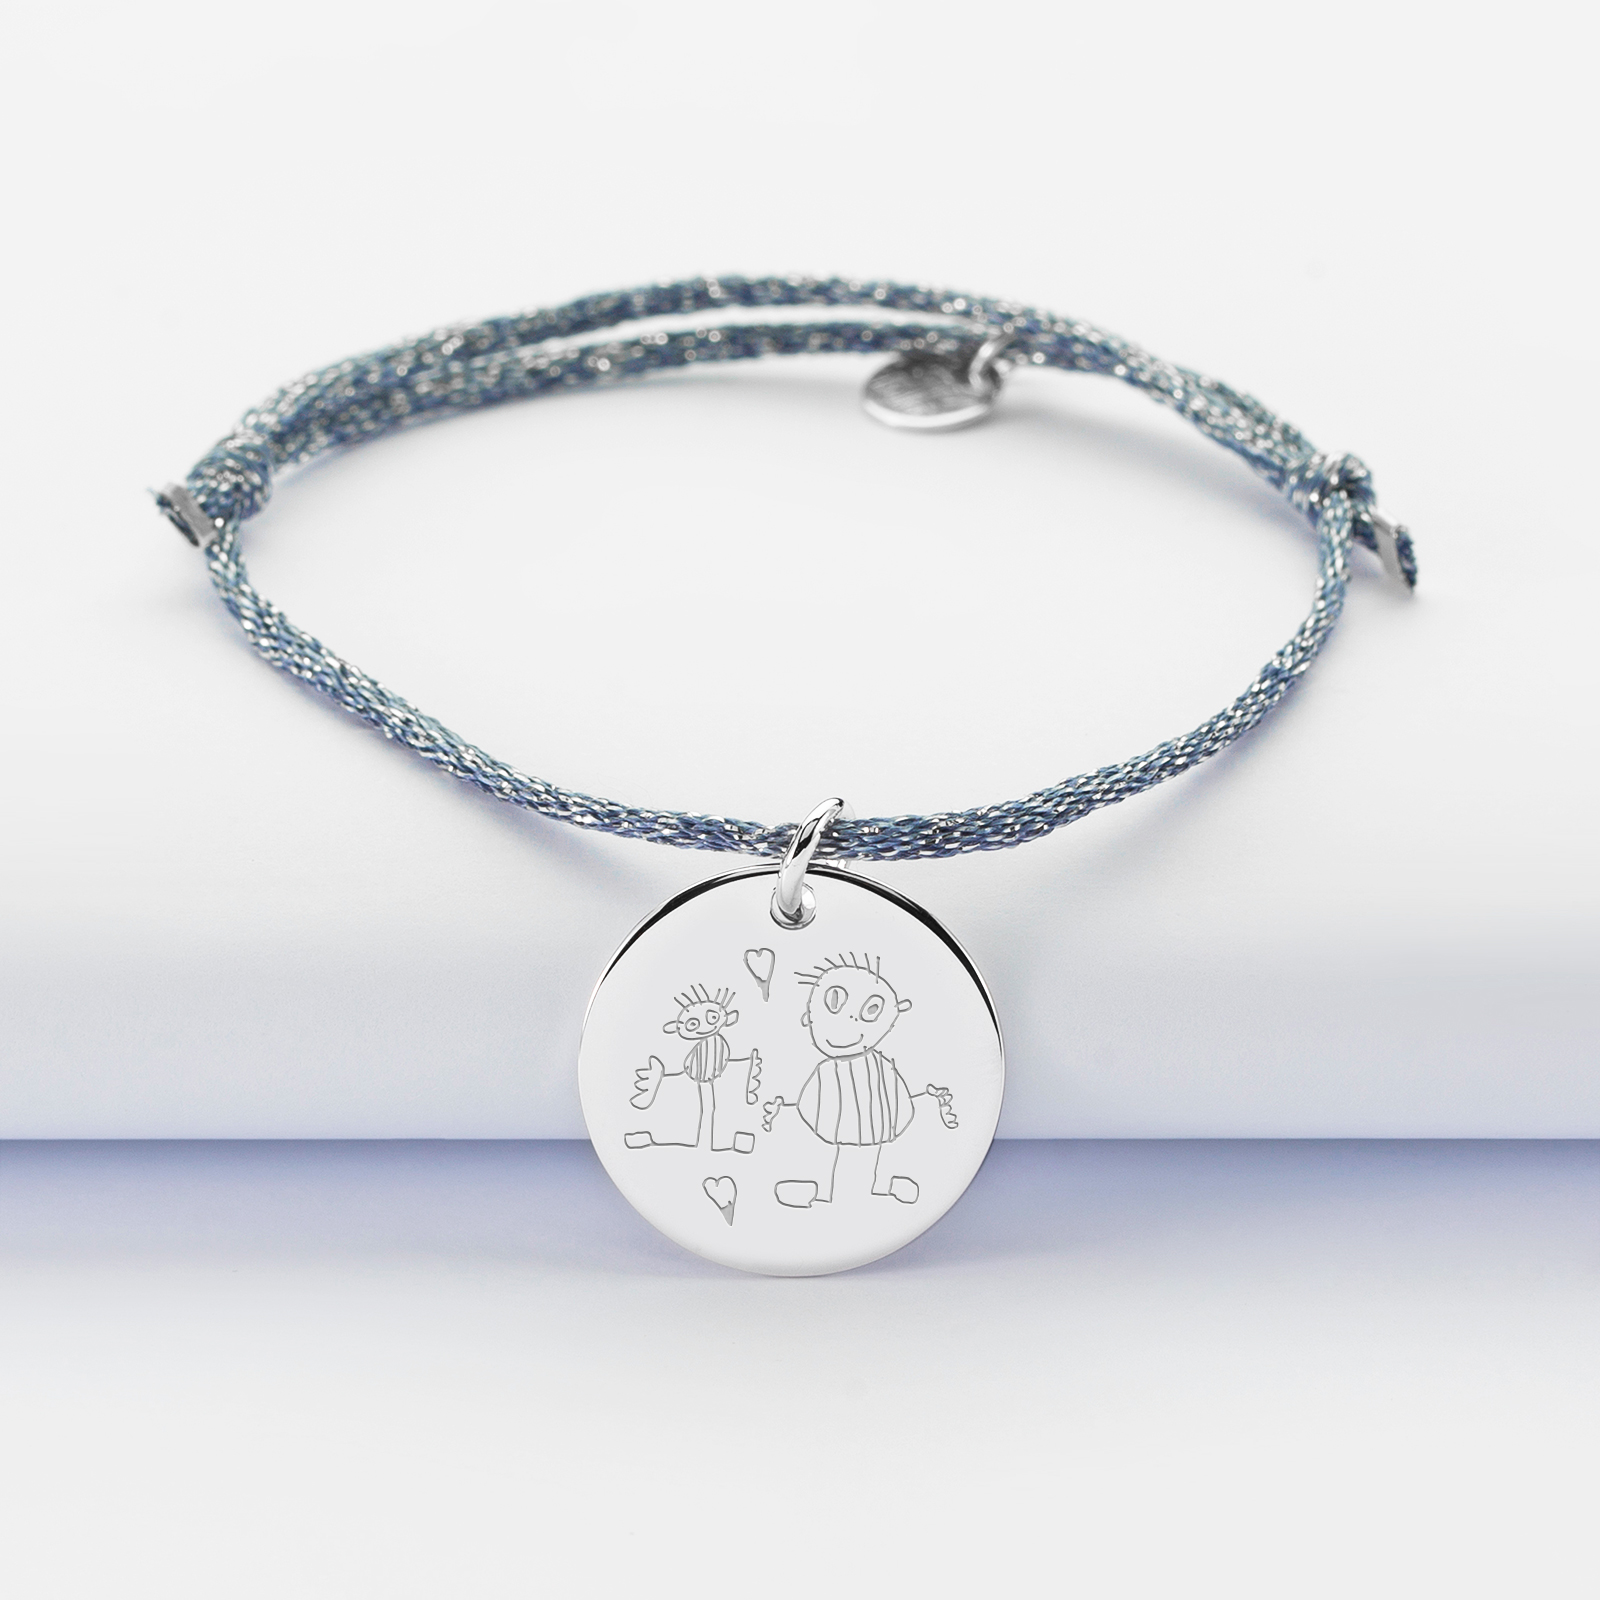 Sparkly cord bracelet with personalised engraved silver medallion 19 mm sketch